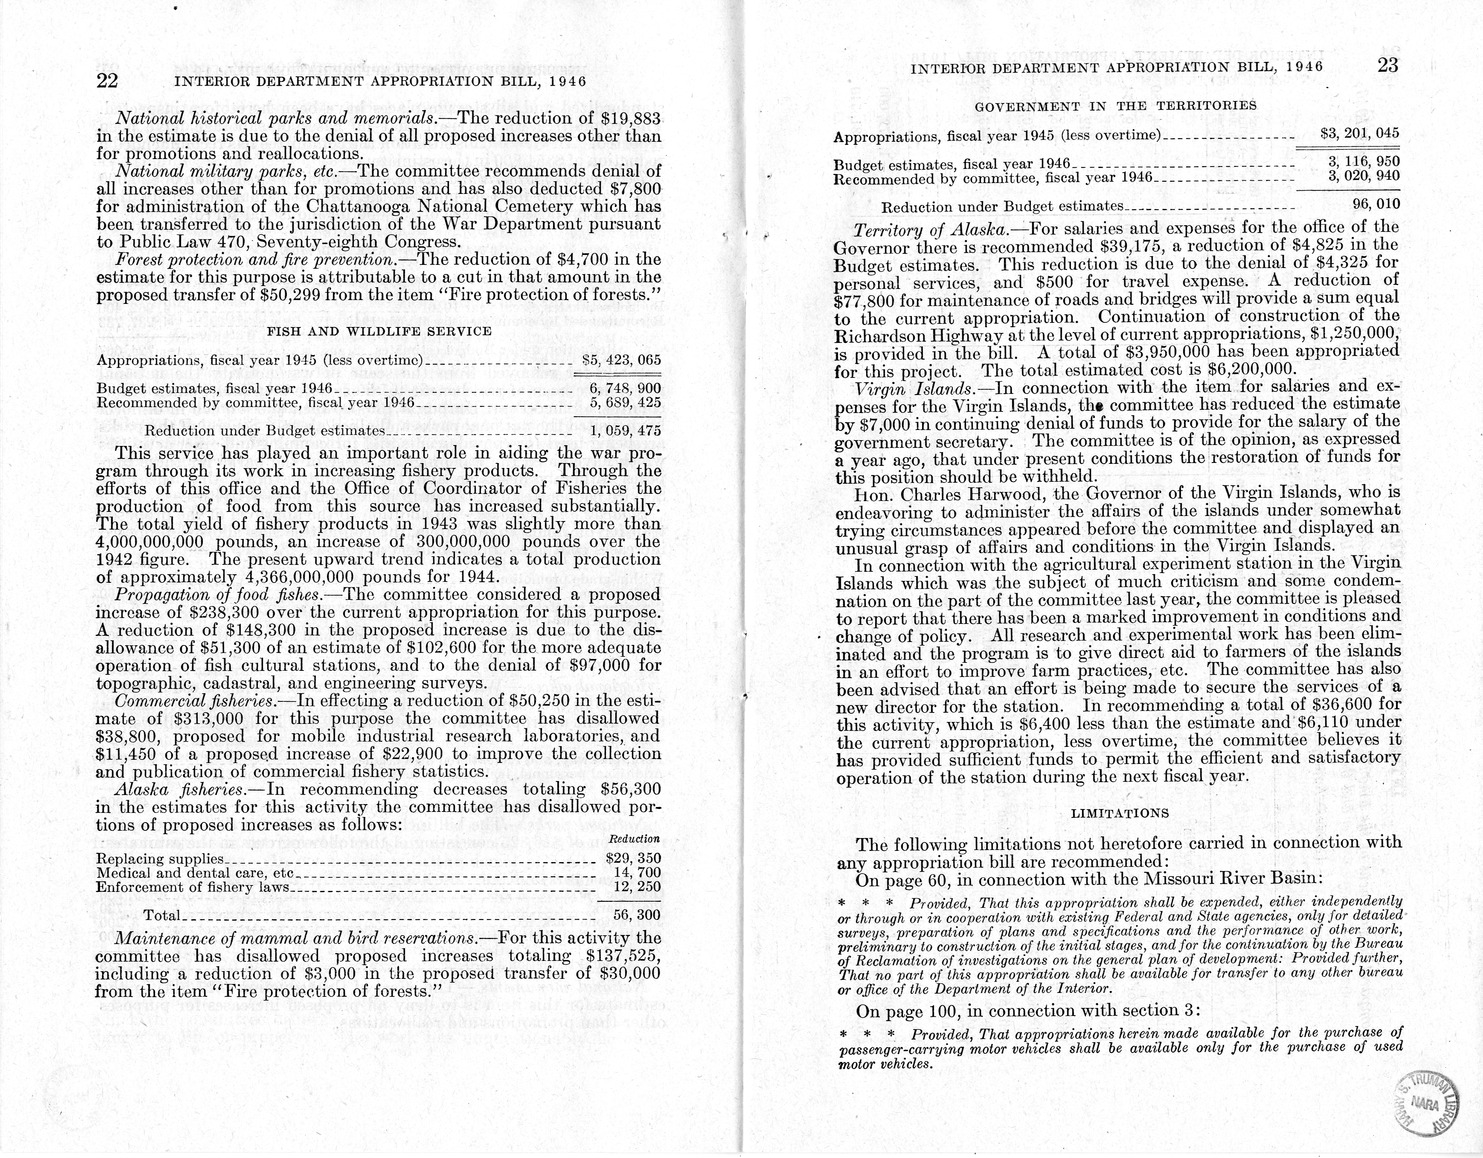 Memorandum from Harold D. Smith to M. C. Latta, H.R. 3024, Making Appropriations for the Department of the Interior for the Fiscal Year Ending June 30, 1946, with Attachments